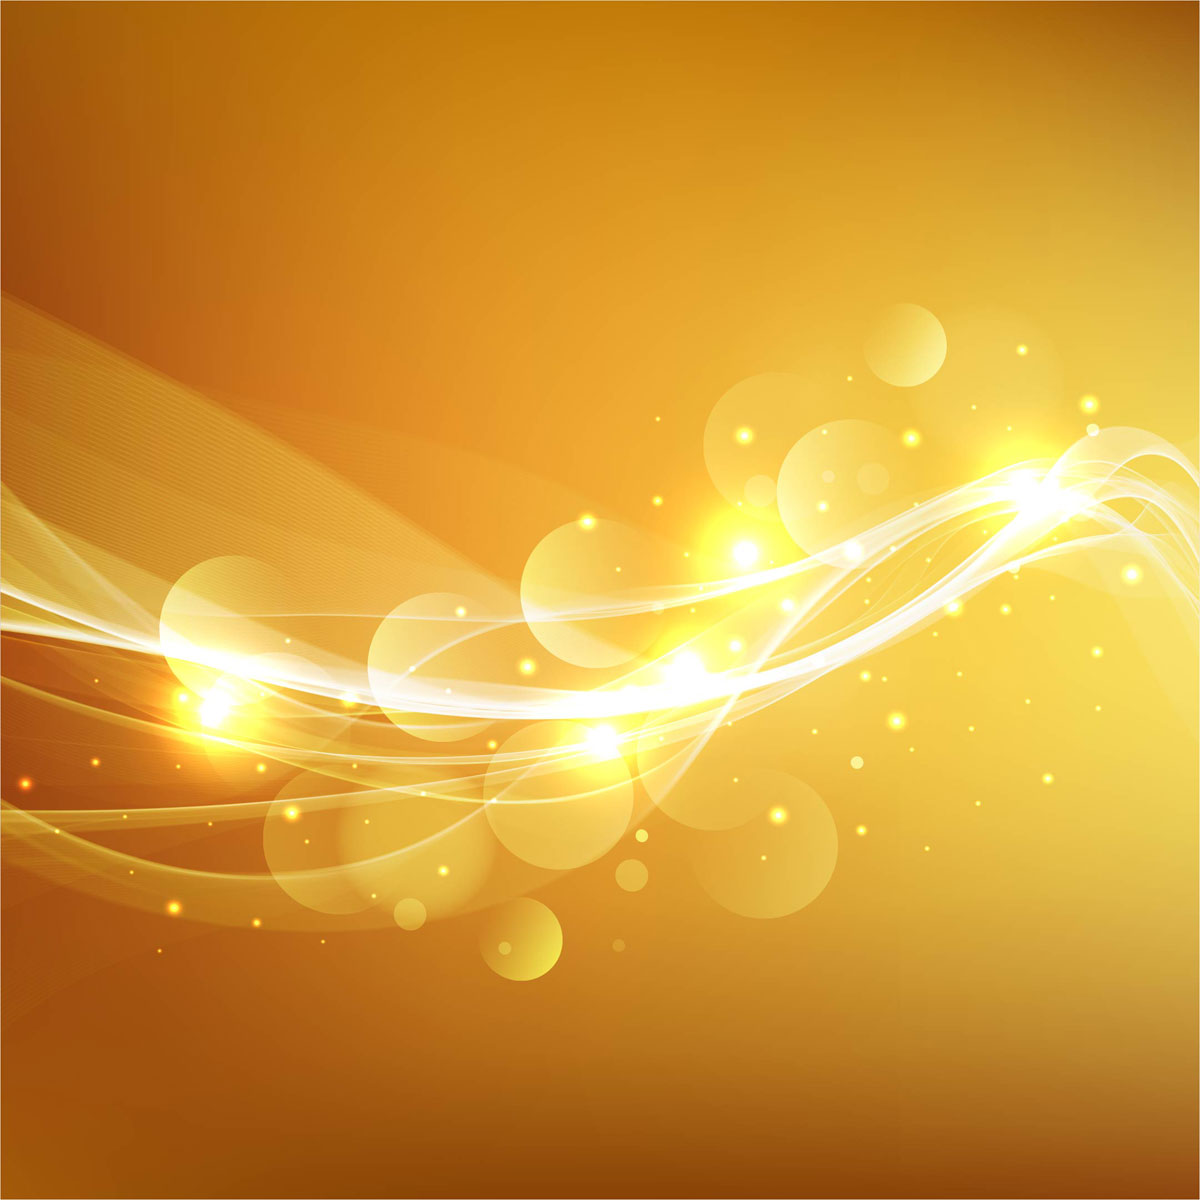 Abstract wavy with halation and yellow background vector  